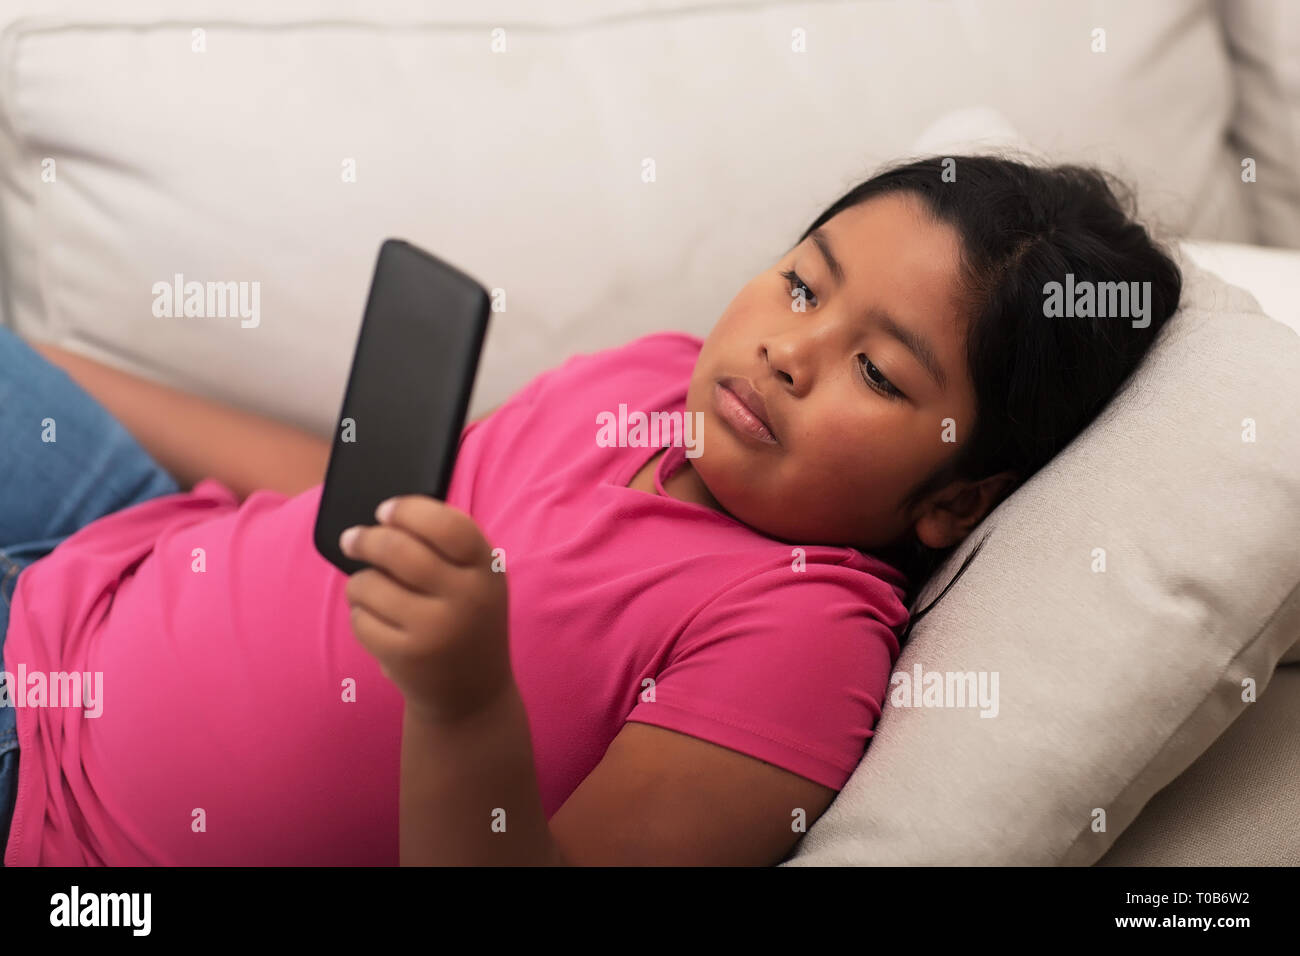 Elementary age student watching something on a mobile phone without parental supervision. Stock Photo